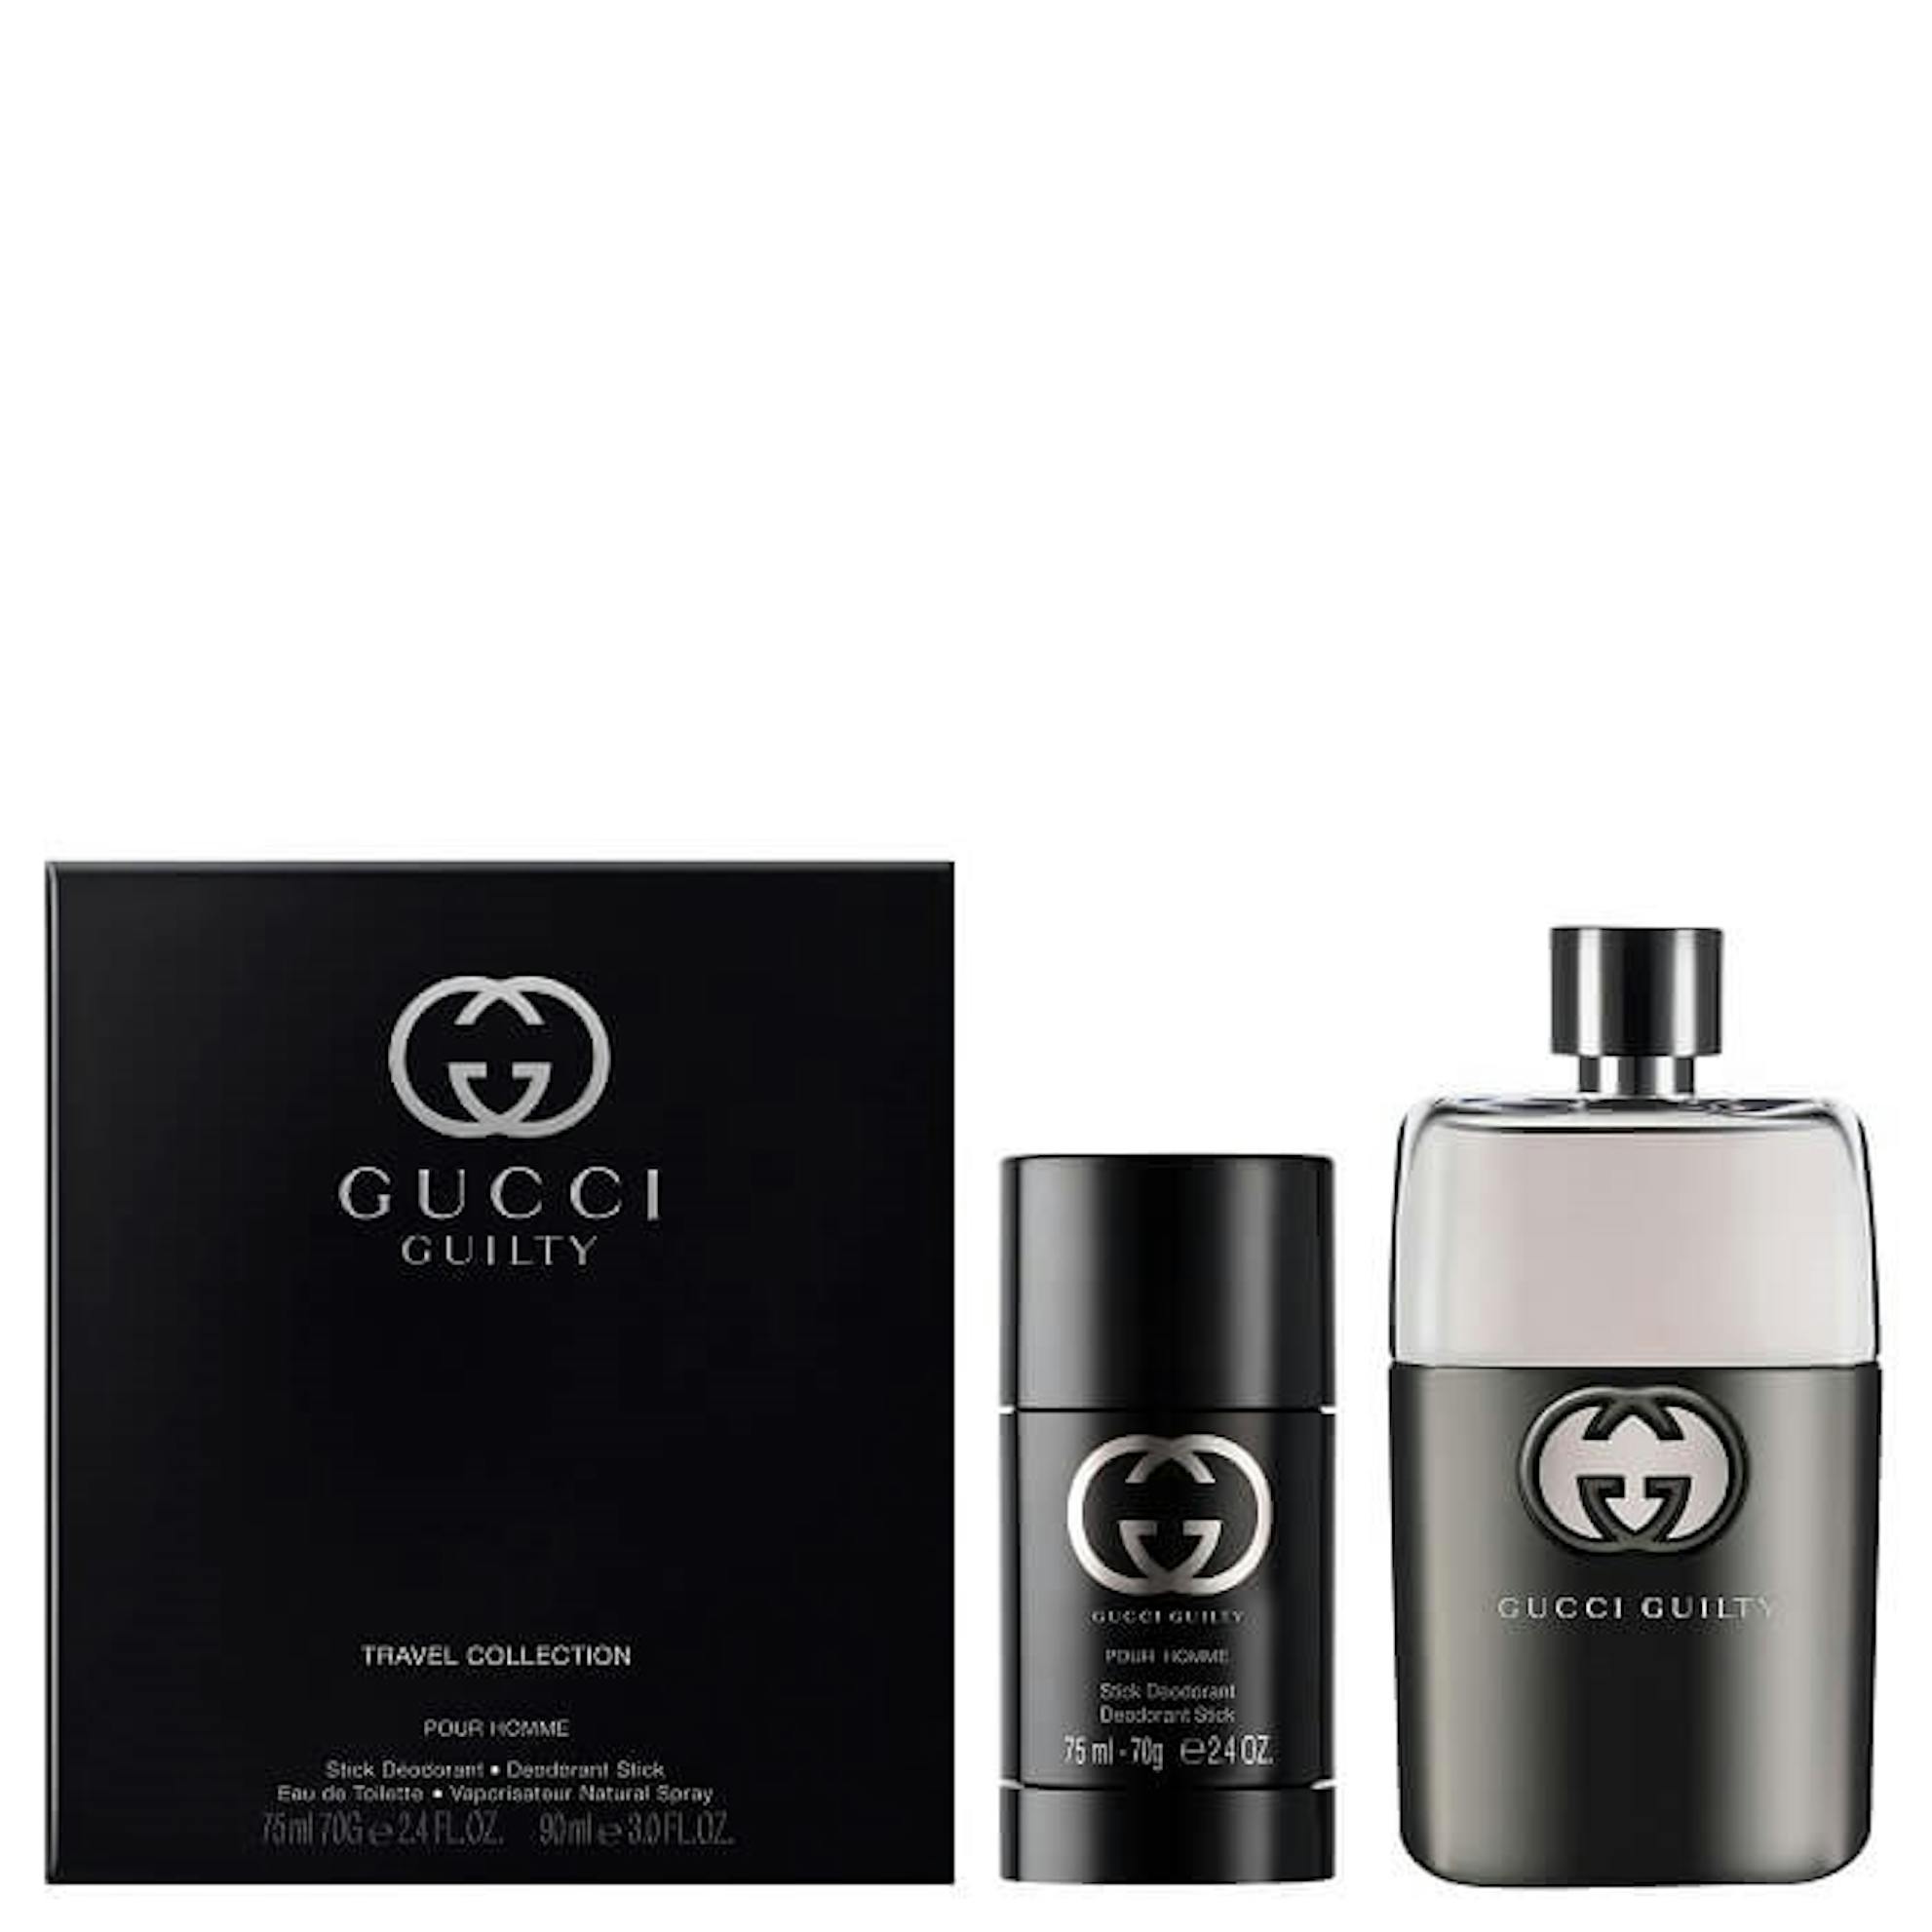 Gucci Guilty 50ml and Deodorant Stick, Giftset for Him available now! | The  Fragrance Shop